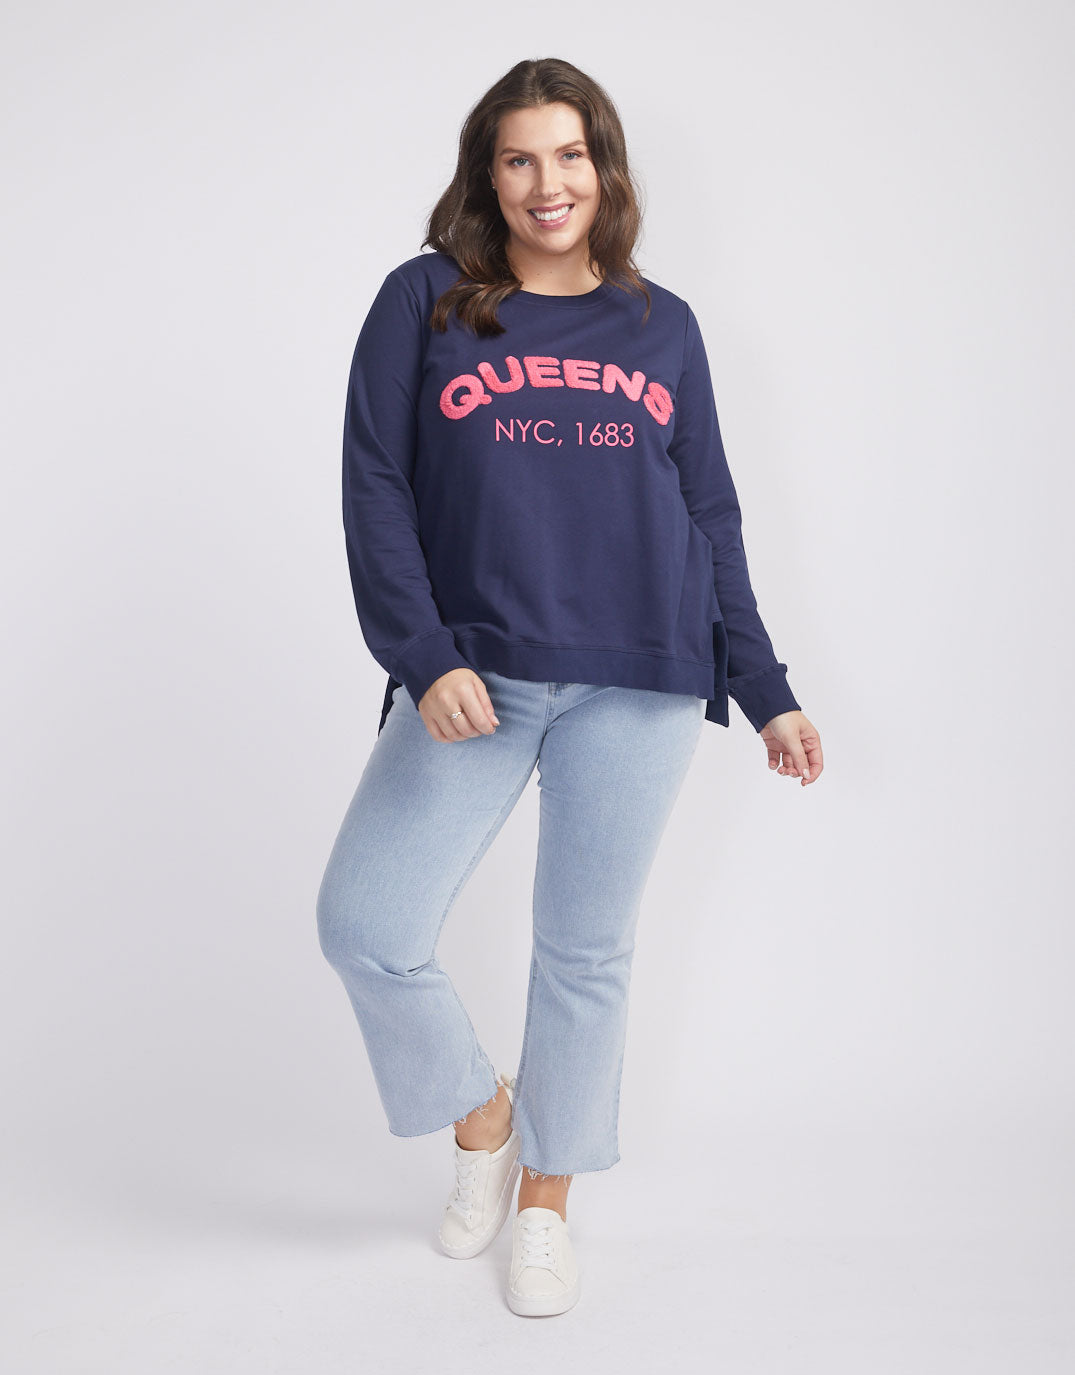 betty-basics-queens-sweat-midnight-ruby-womens-plus-size-clothing